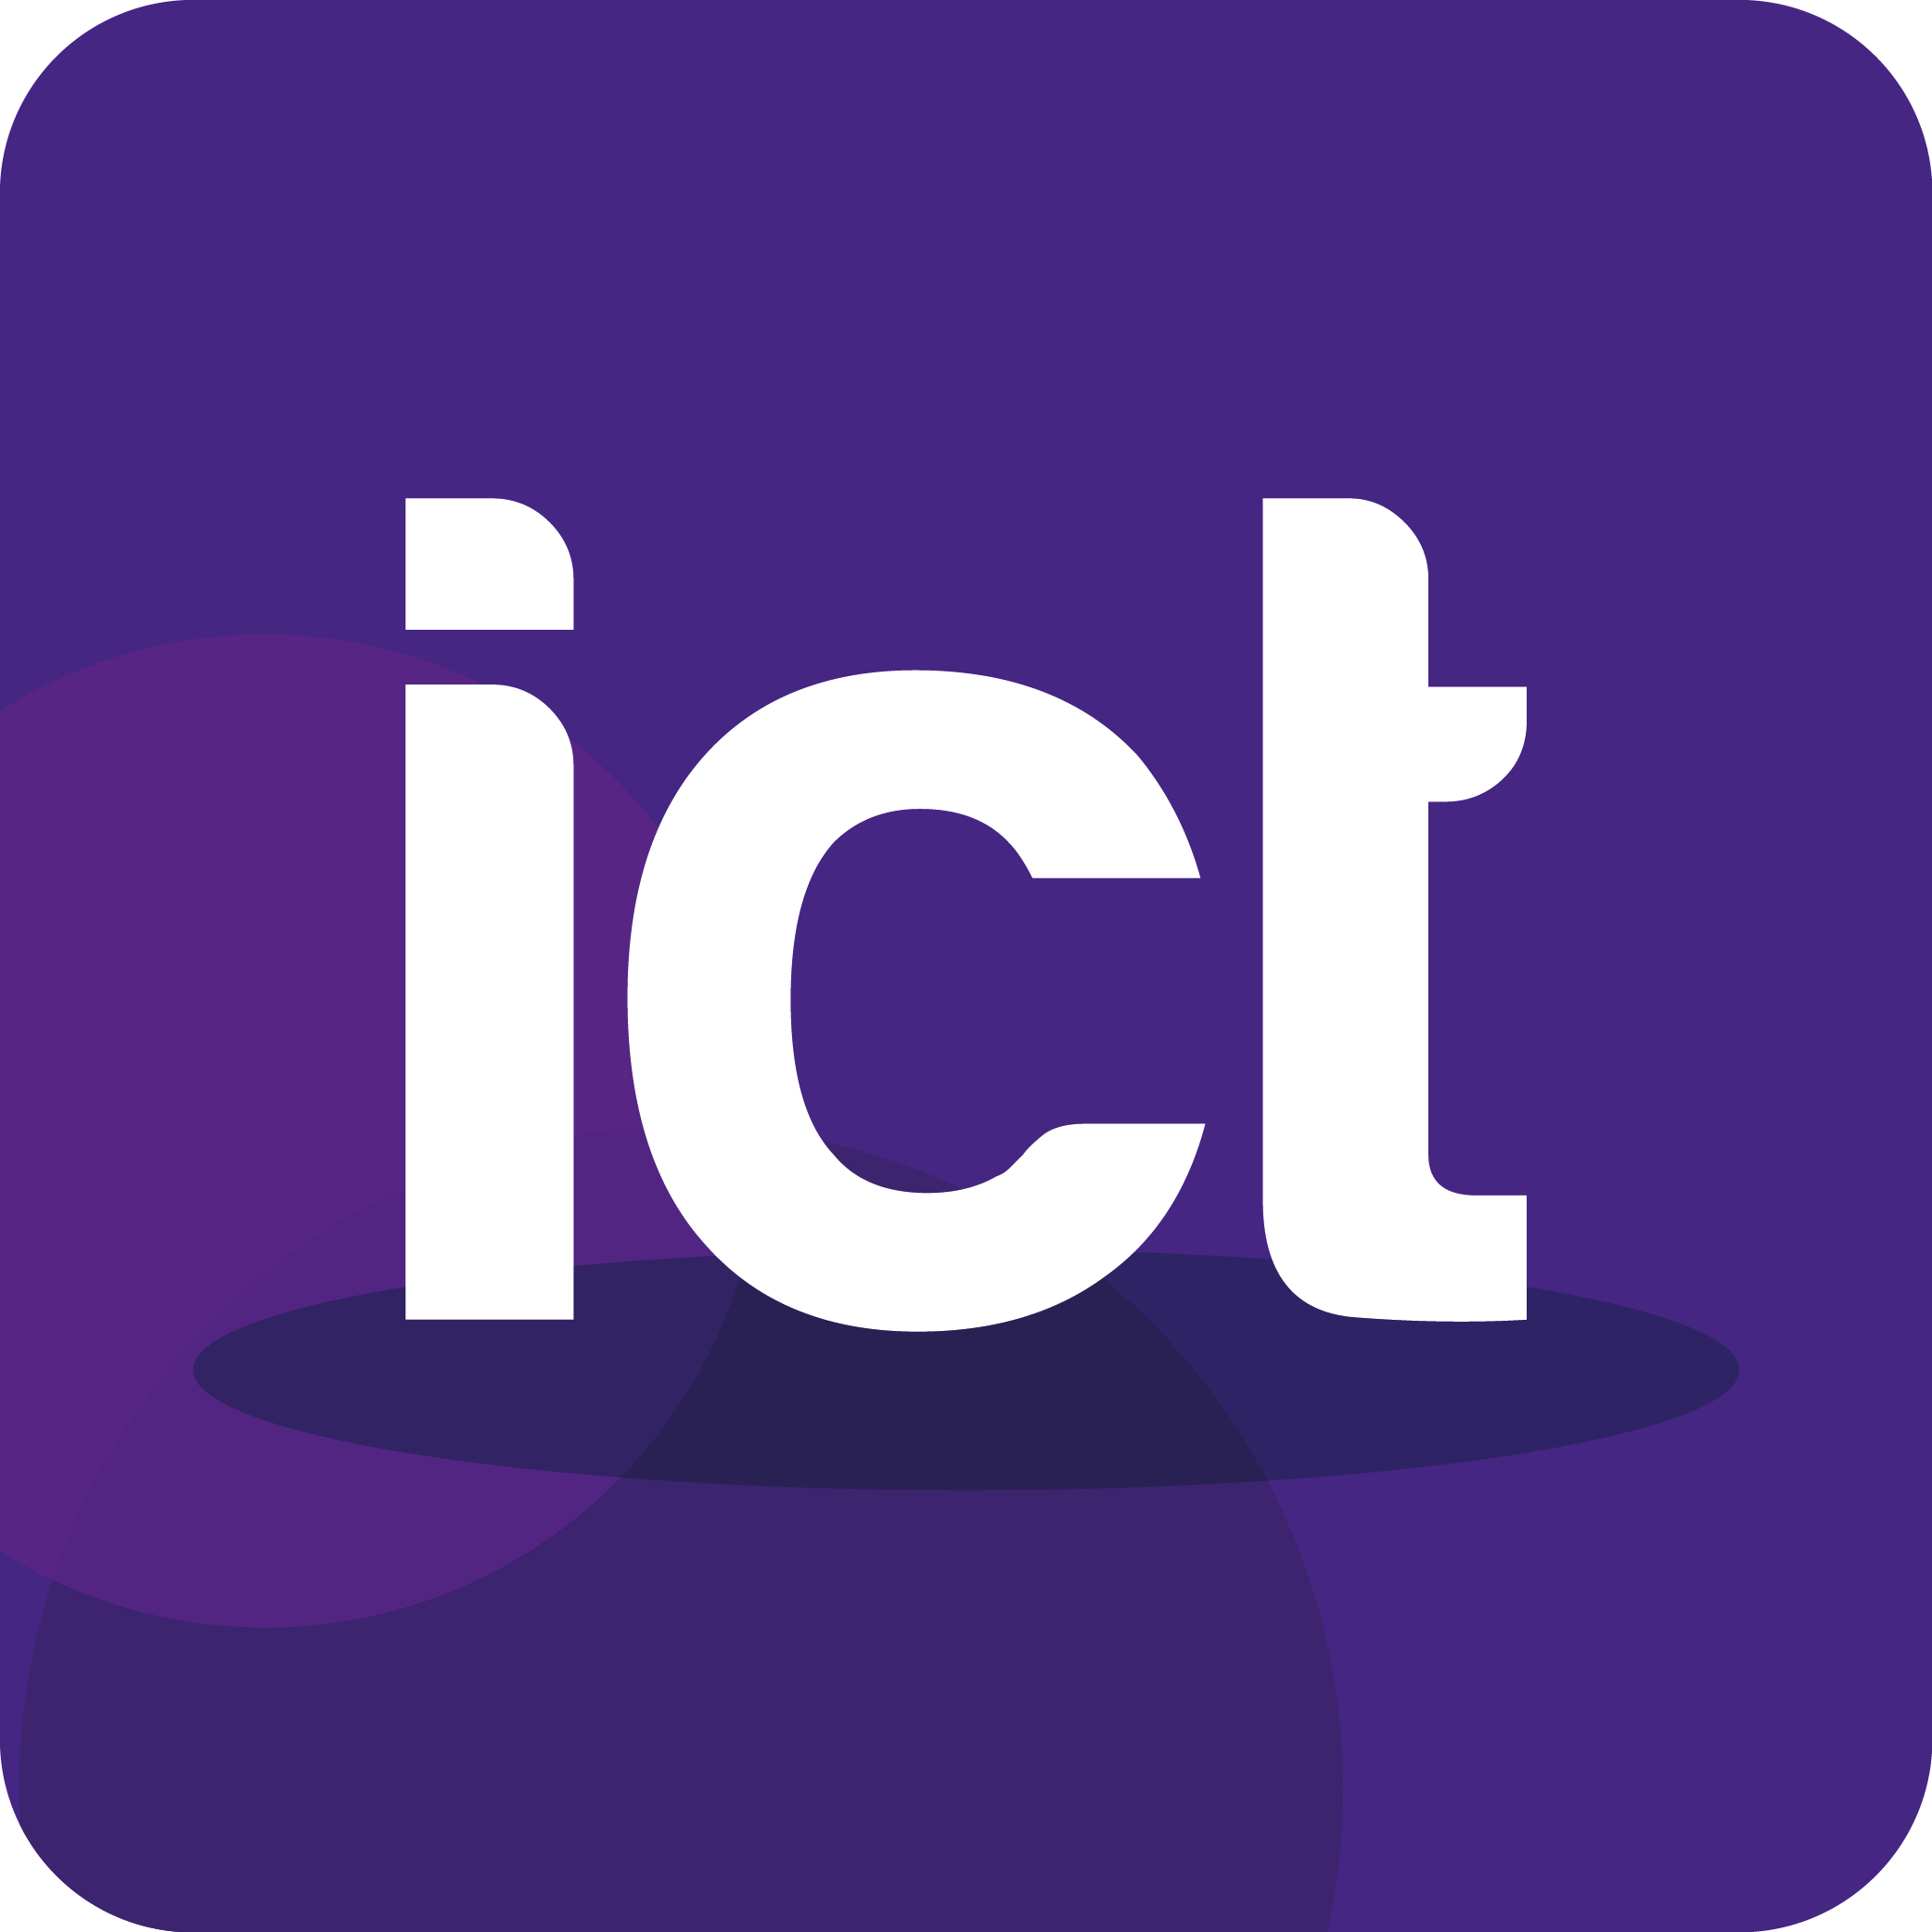 Information and Communication Technology (ICT) nelle aziende sanitarie